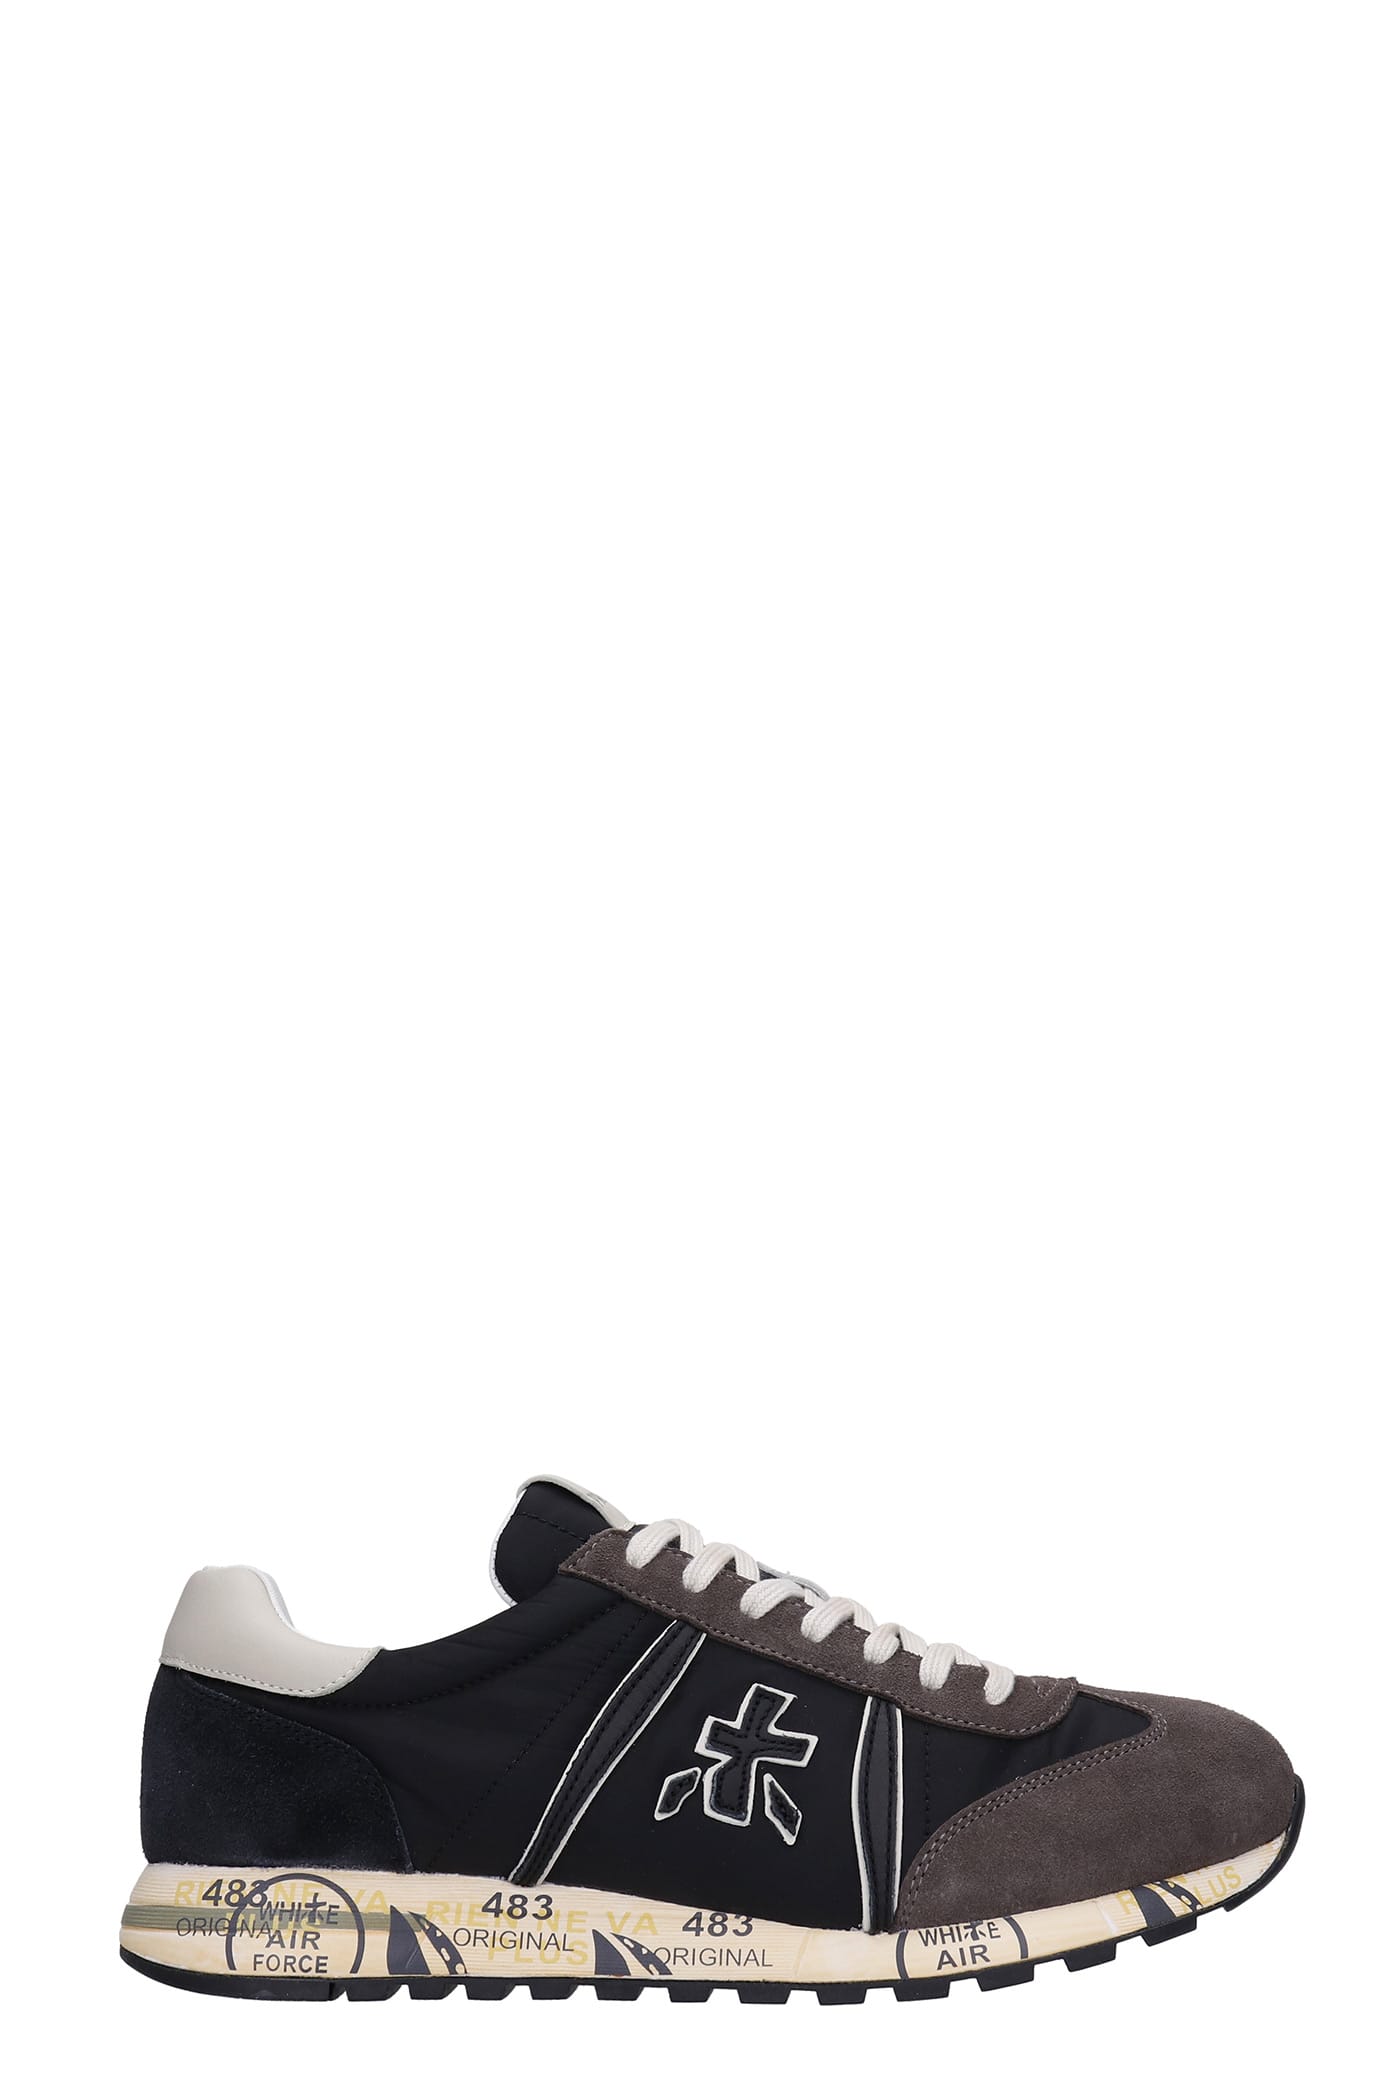 Premiata Lucy Sneakers In Black Suede And Fabric